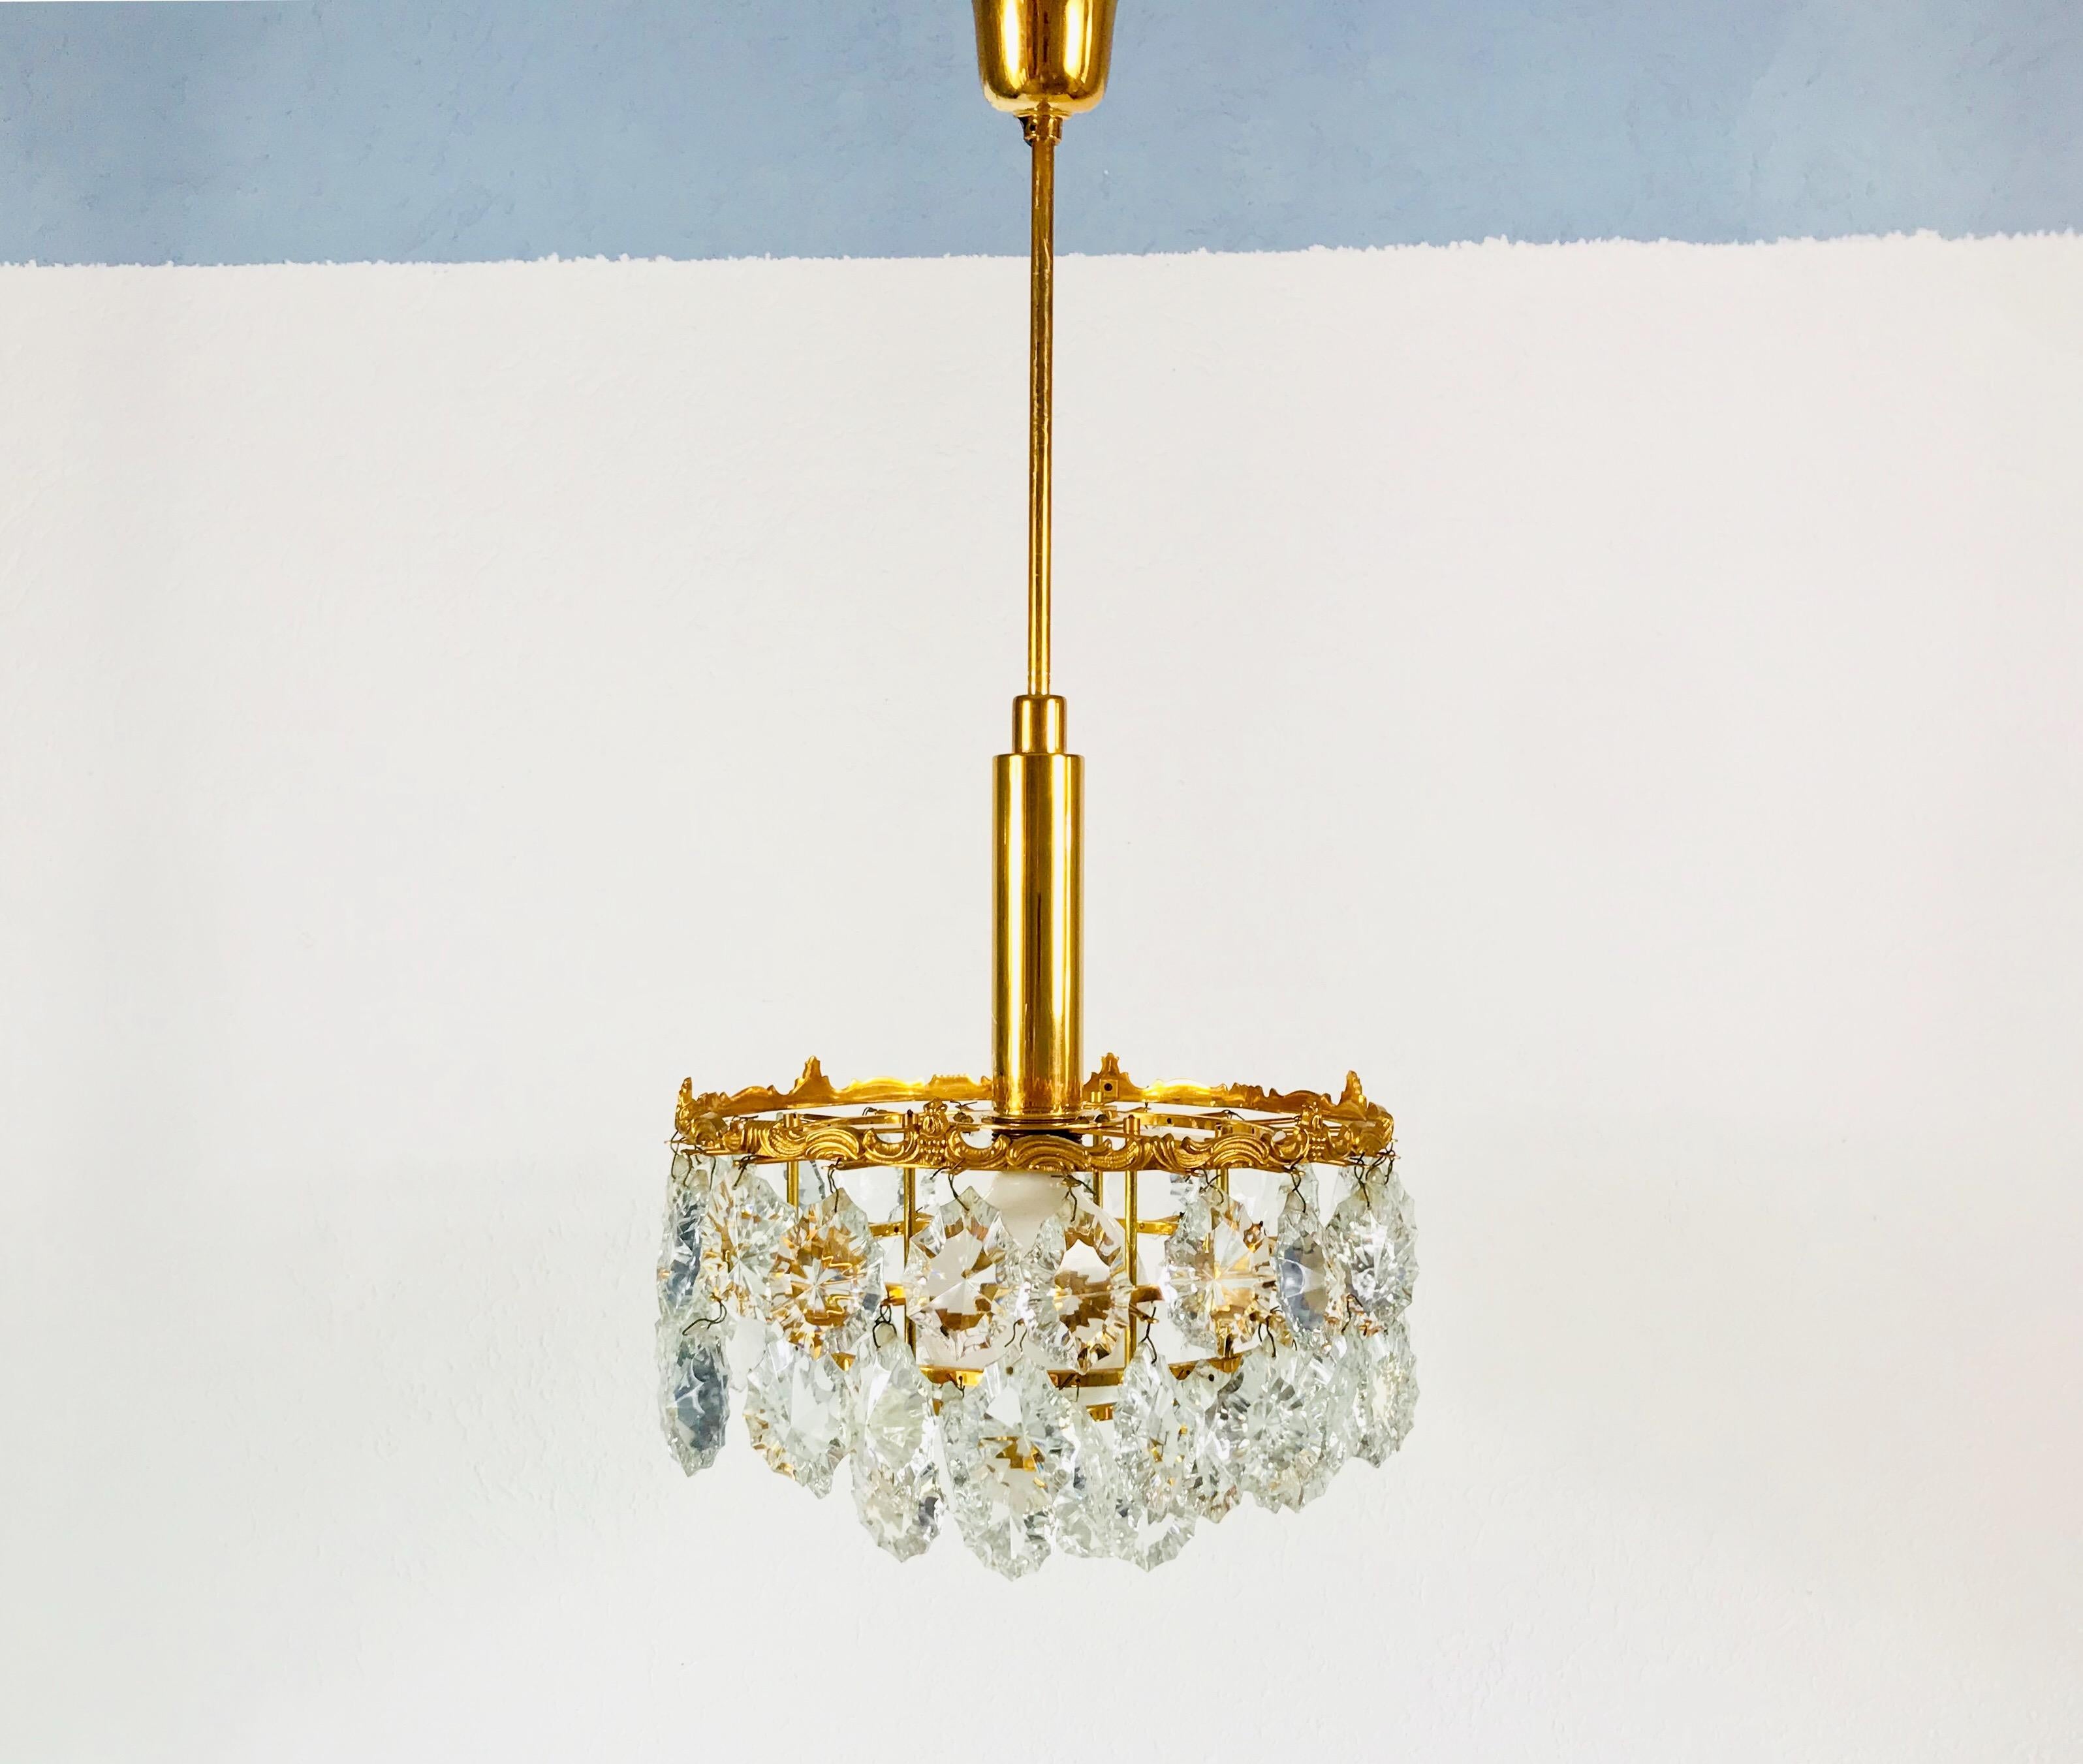 Hollywood Regency Gilt Brass and Crystal Glass 4-Tier Chandelier by Palwa, Germany, 1970s For Sale